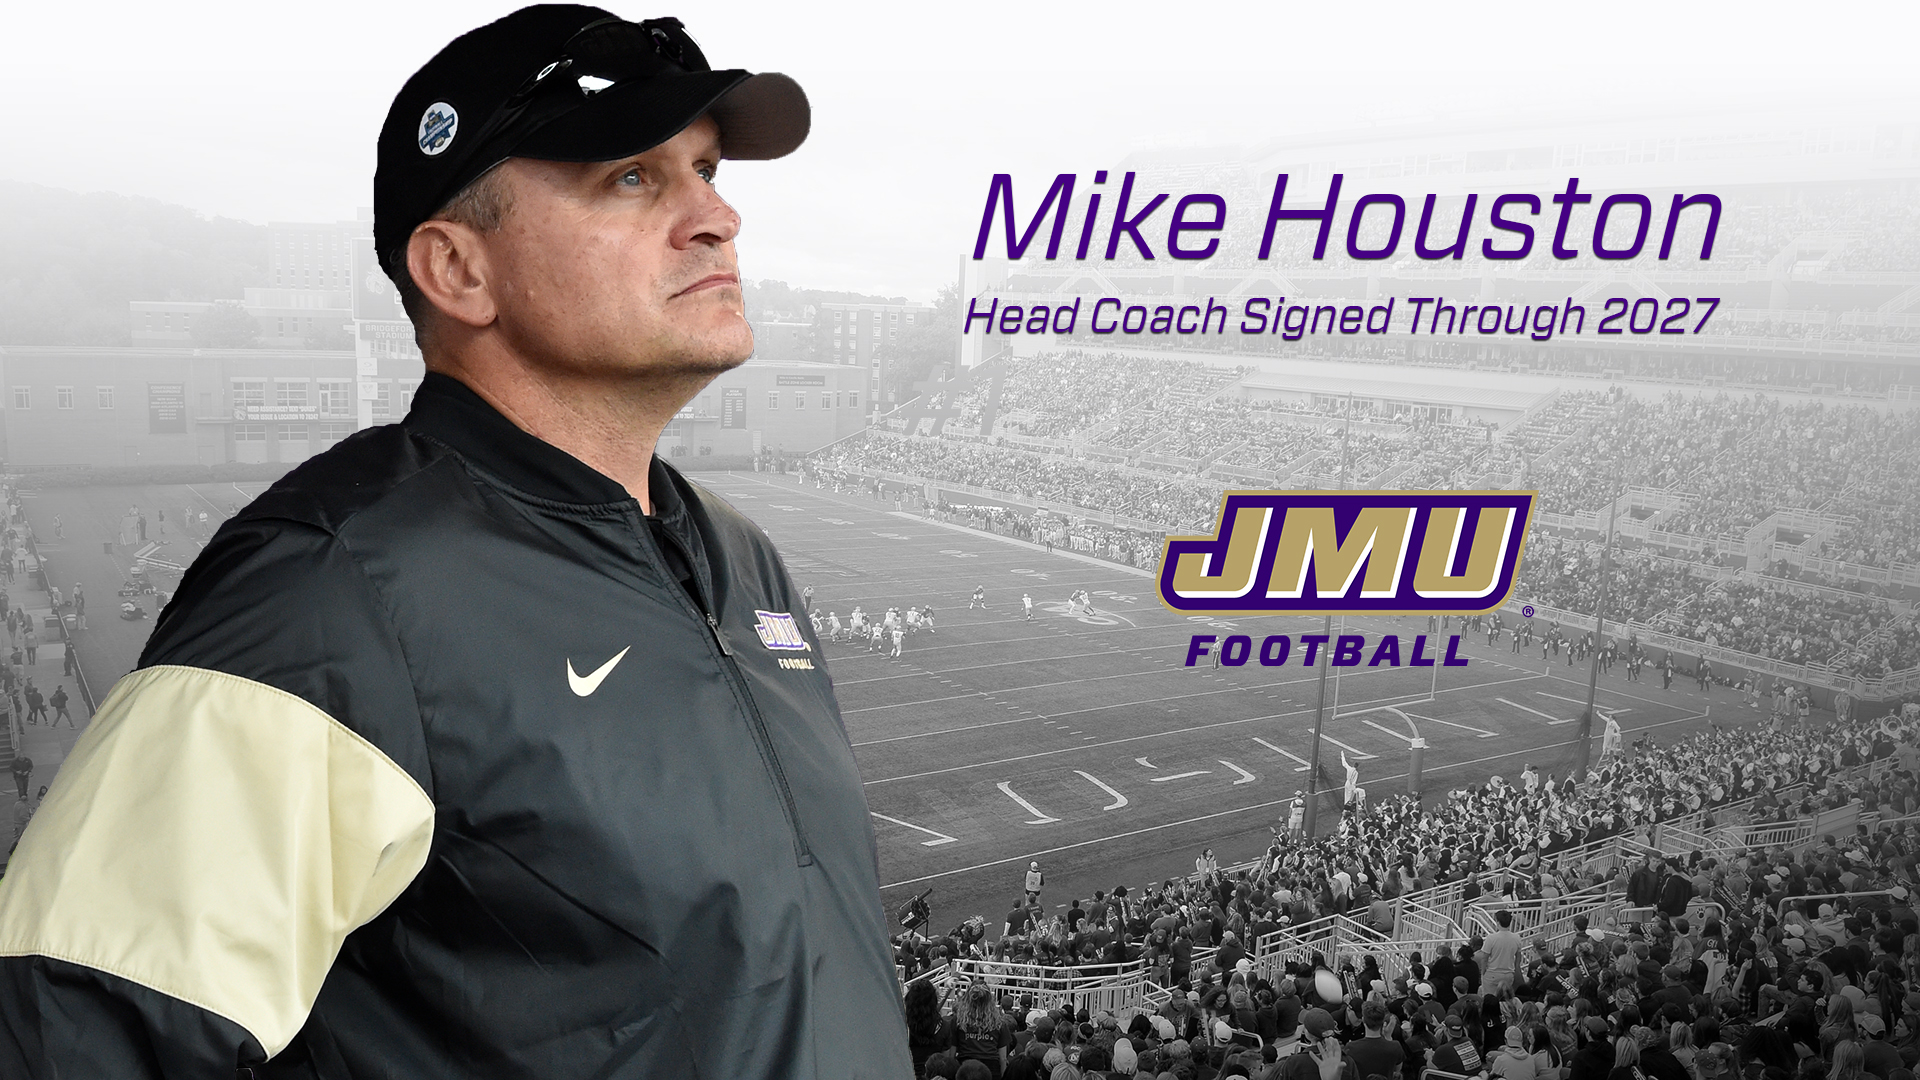 Mike Houston May Leave – One JMU Fan’s Perspective